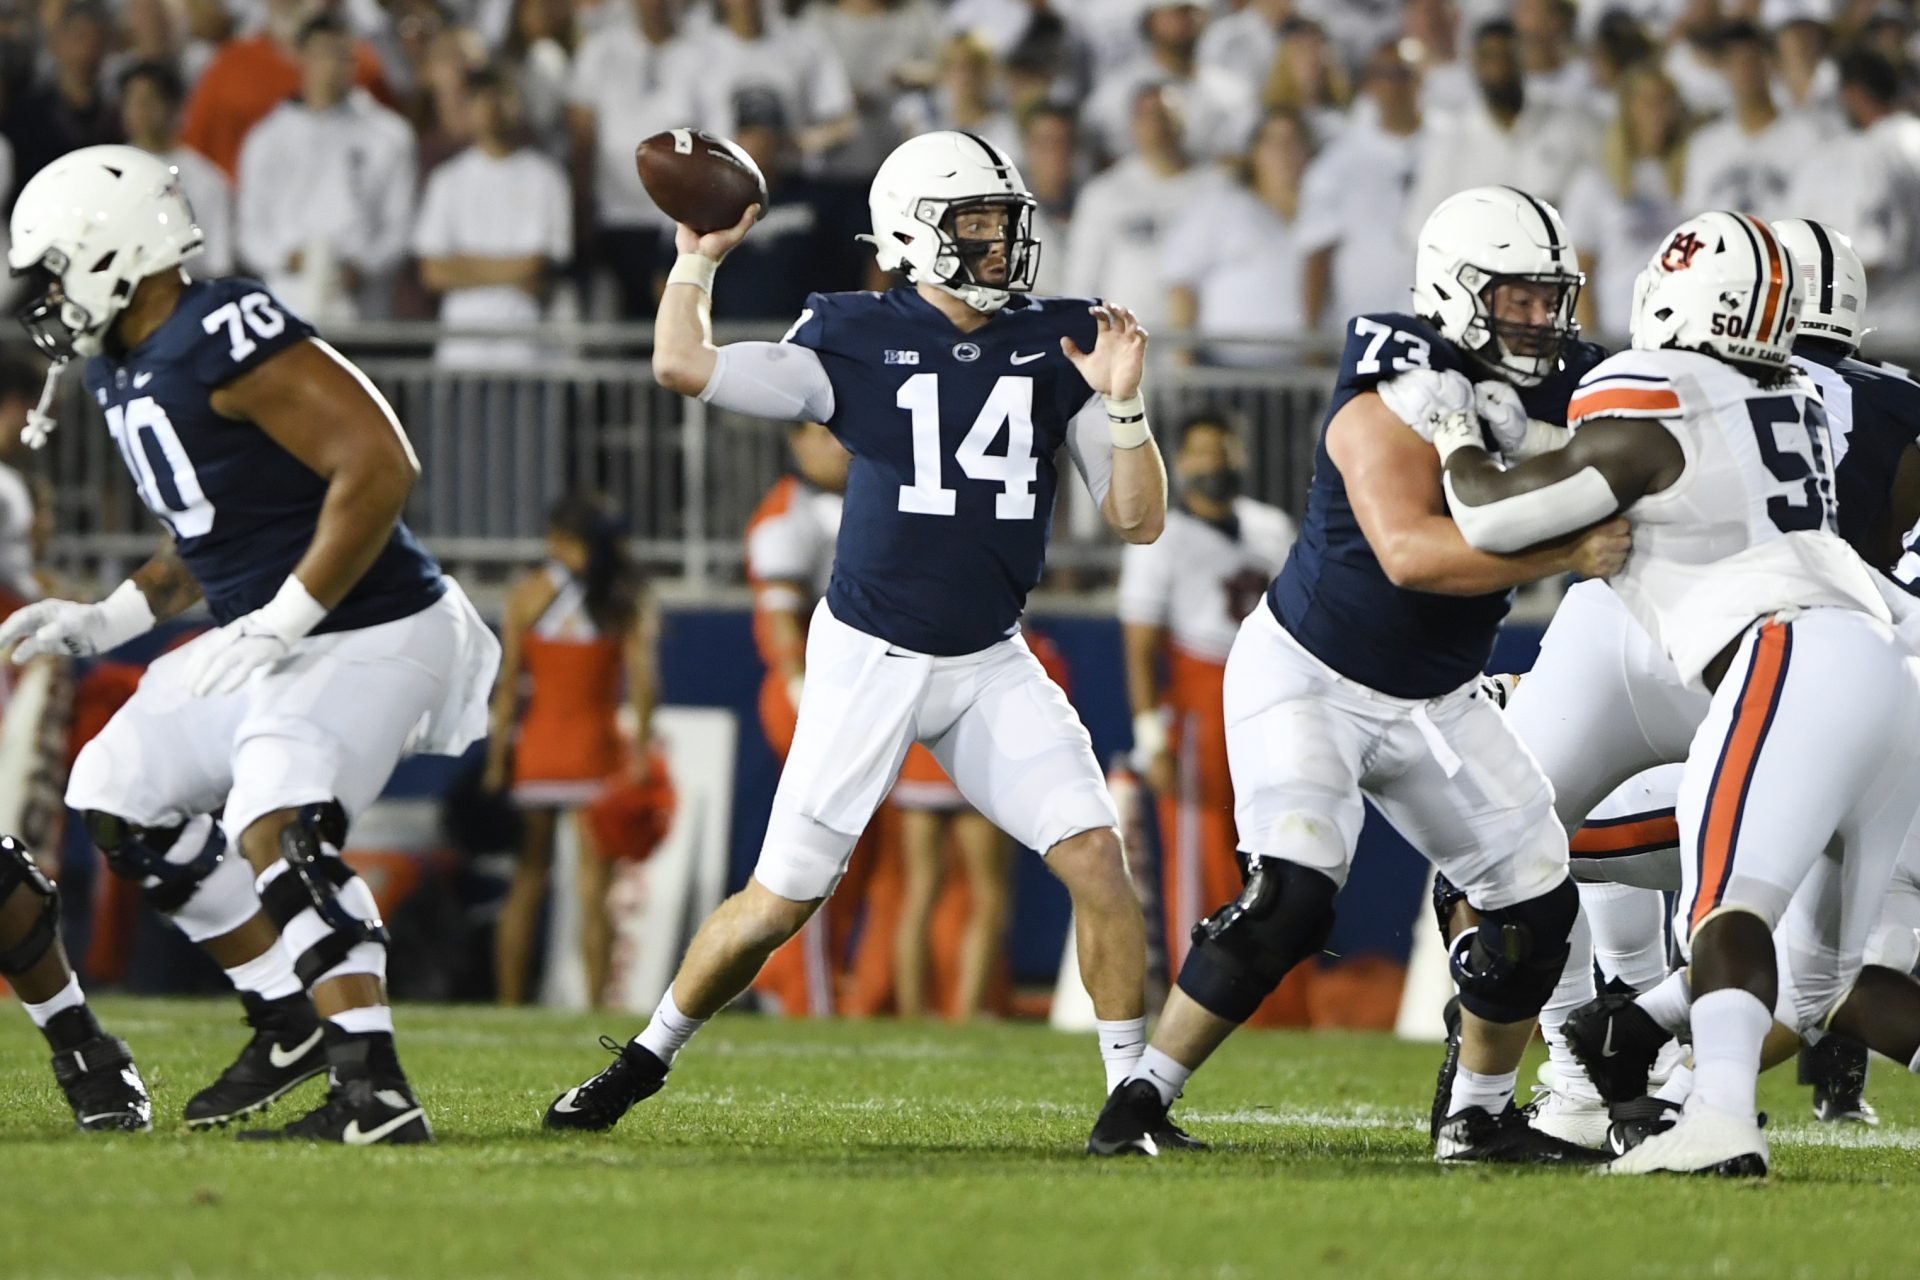 Penn State quarterback Sean Clifford (14) passes during an NCAA college football game against Auburn in State College, Pa., on Saturday, Sept. 18, 2021.